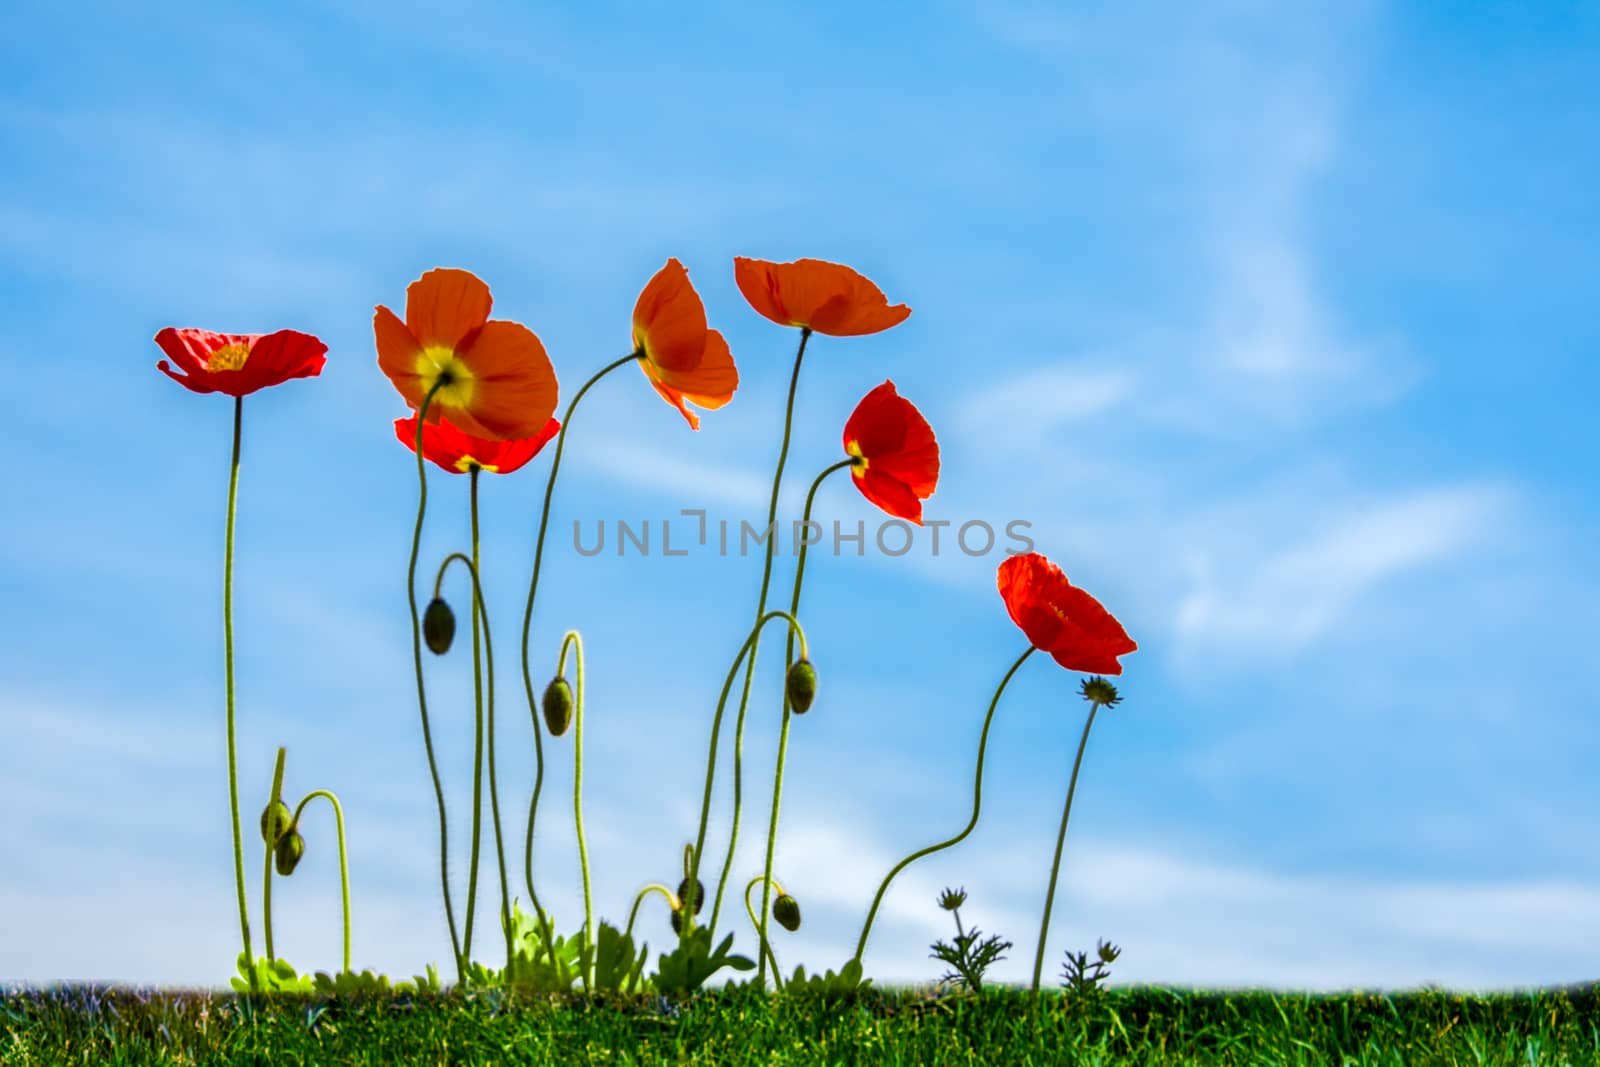 Beautiful red poppies stand on a green meadow against a blue-sky with white clouds